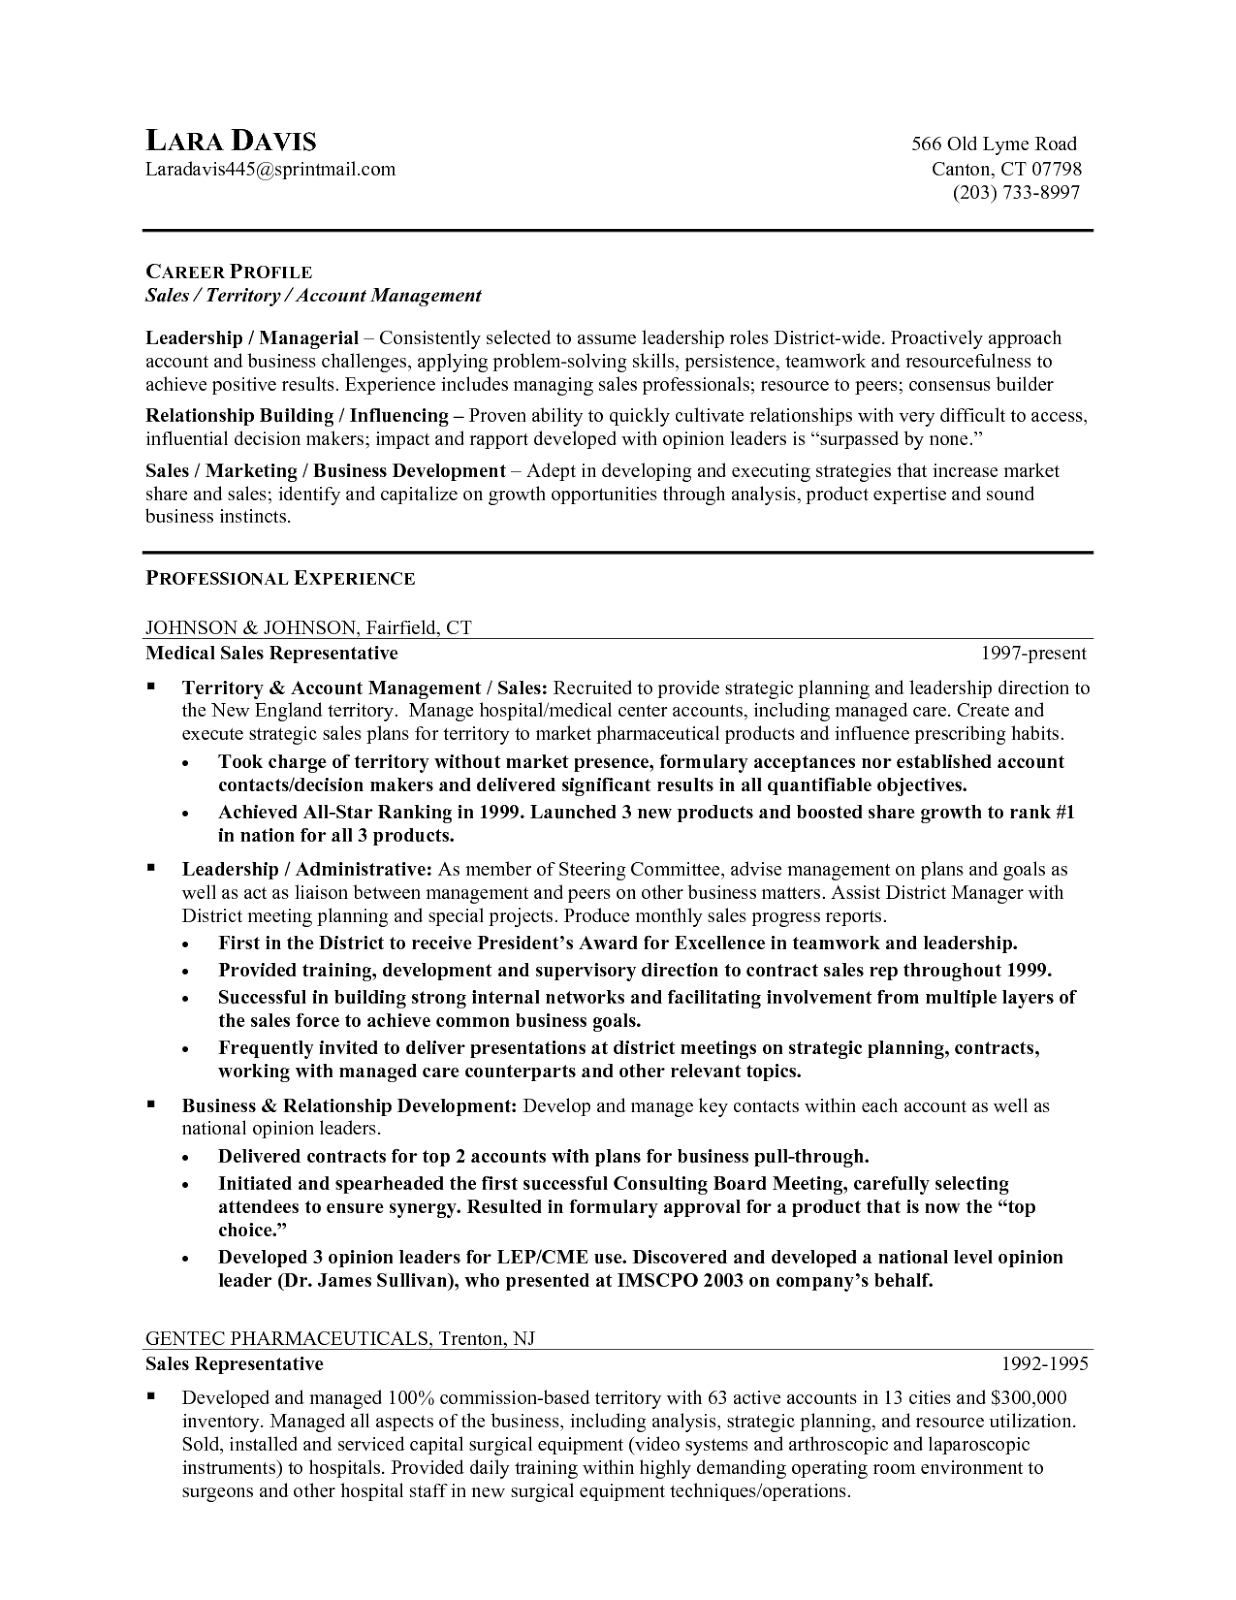 Resume for pharmaceutical q a manager